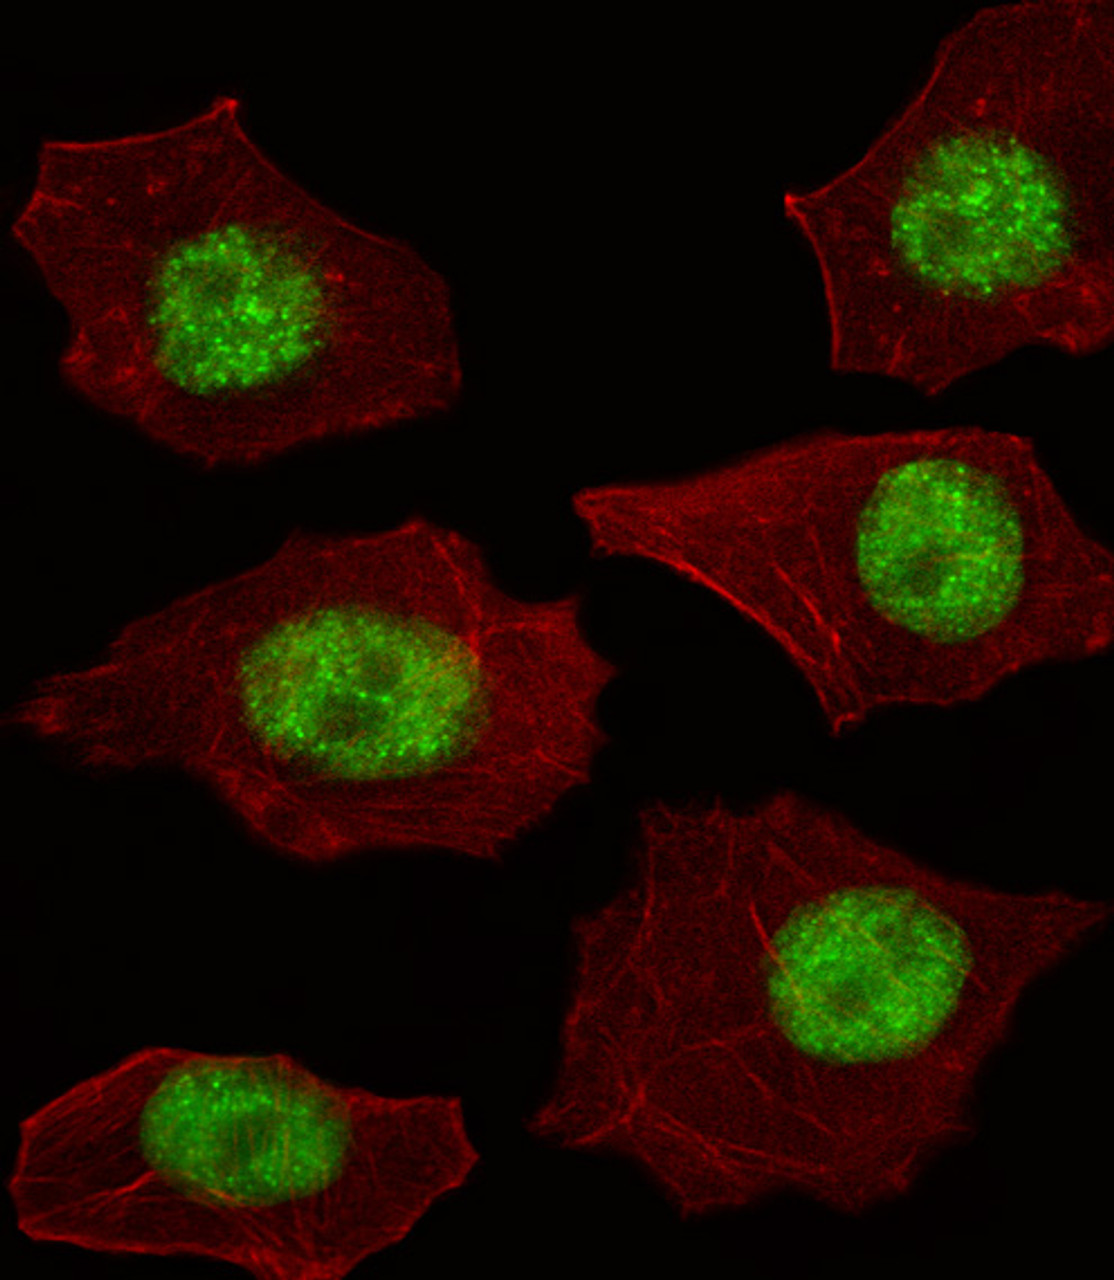 Fluorescent image of A549 cell stained with LMO4 Antibody .A549 cells were fixed with 4% PFA (20 min) , permeabilized with Triton X-100 (0.1%, 10 min) , then incubated with LMO4 primary antibody (1:25) . For secondary antibody, Alexa Fluor 488 conjugated donkey anti-rabbit antibody (green) was used (1:400) .Cytoplasmic actin was counterstained with Alexa Fluor 555 (red) conjugated Phalloidin (7units/ml) .LMO4 immunoreactivity is localized to Nucleus significantly.